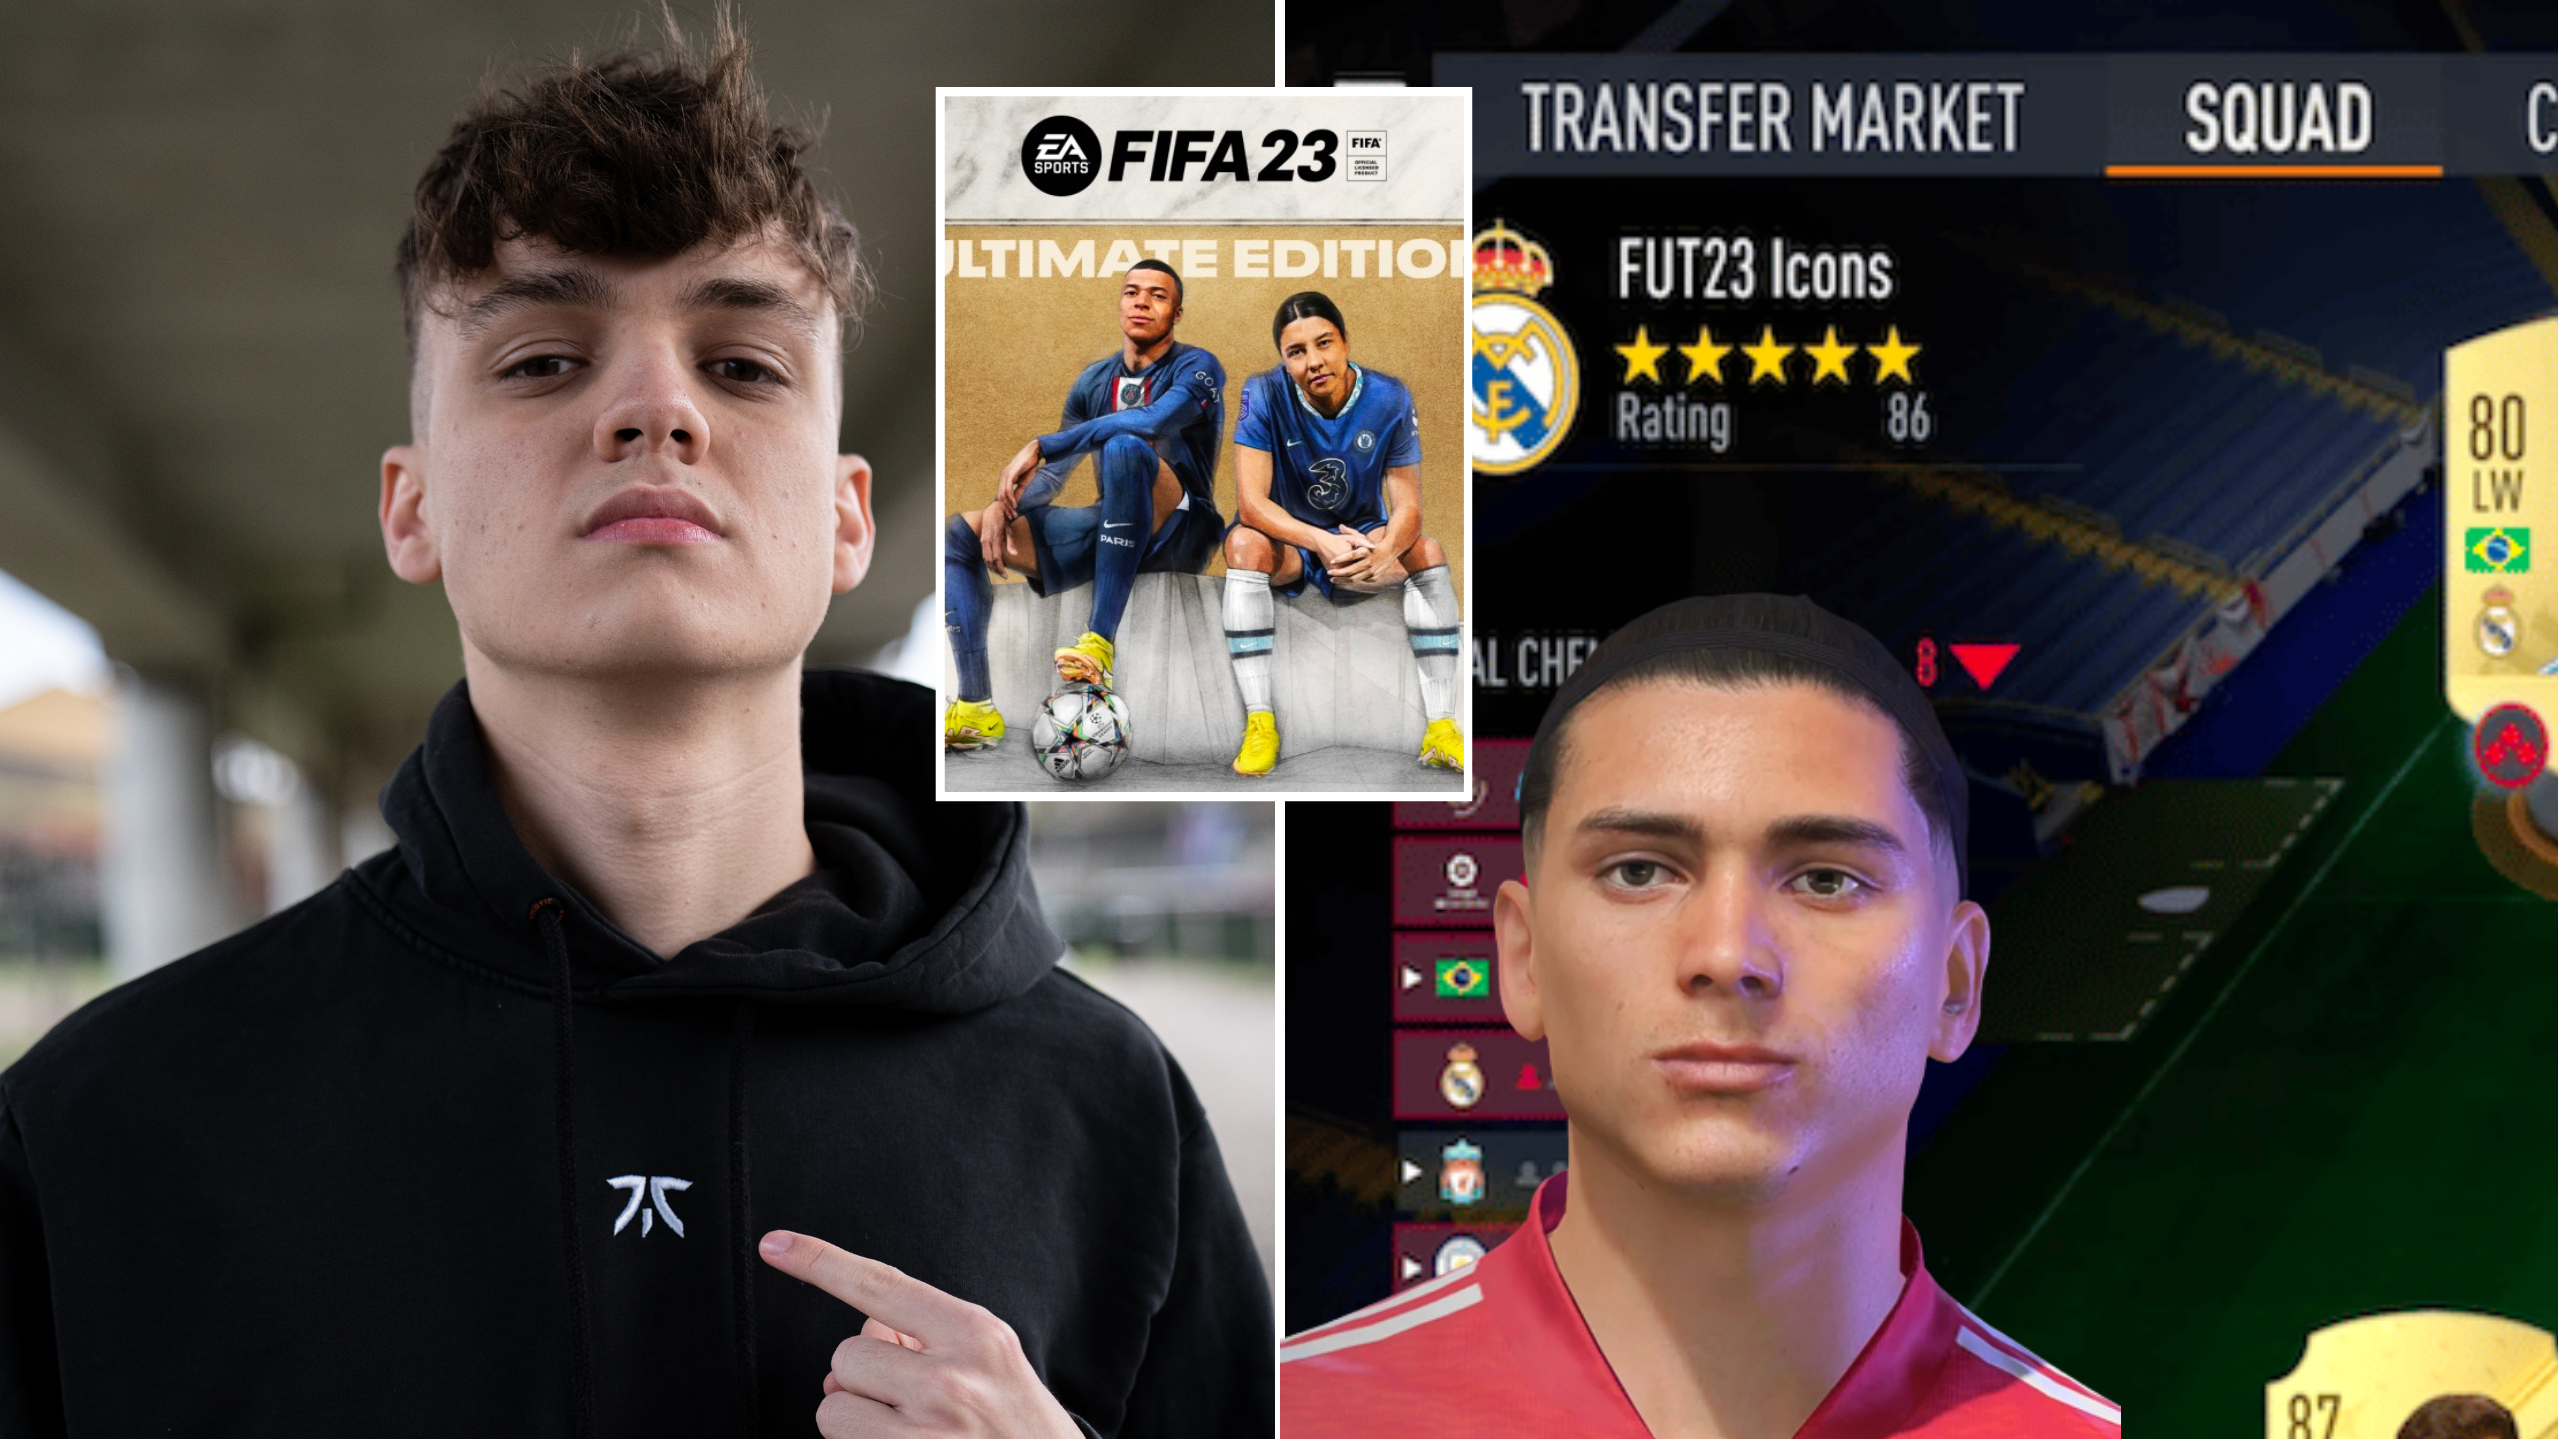 Best FIFA team and players under 200K coins in FIFA 23